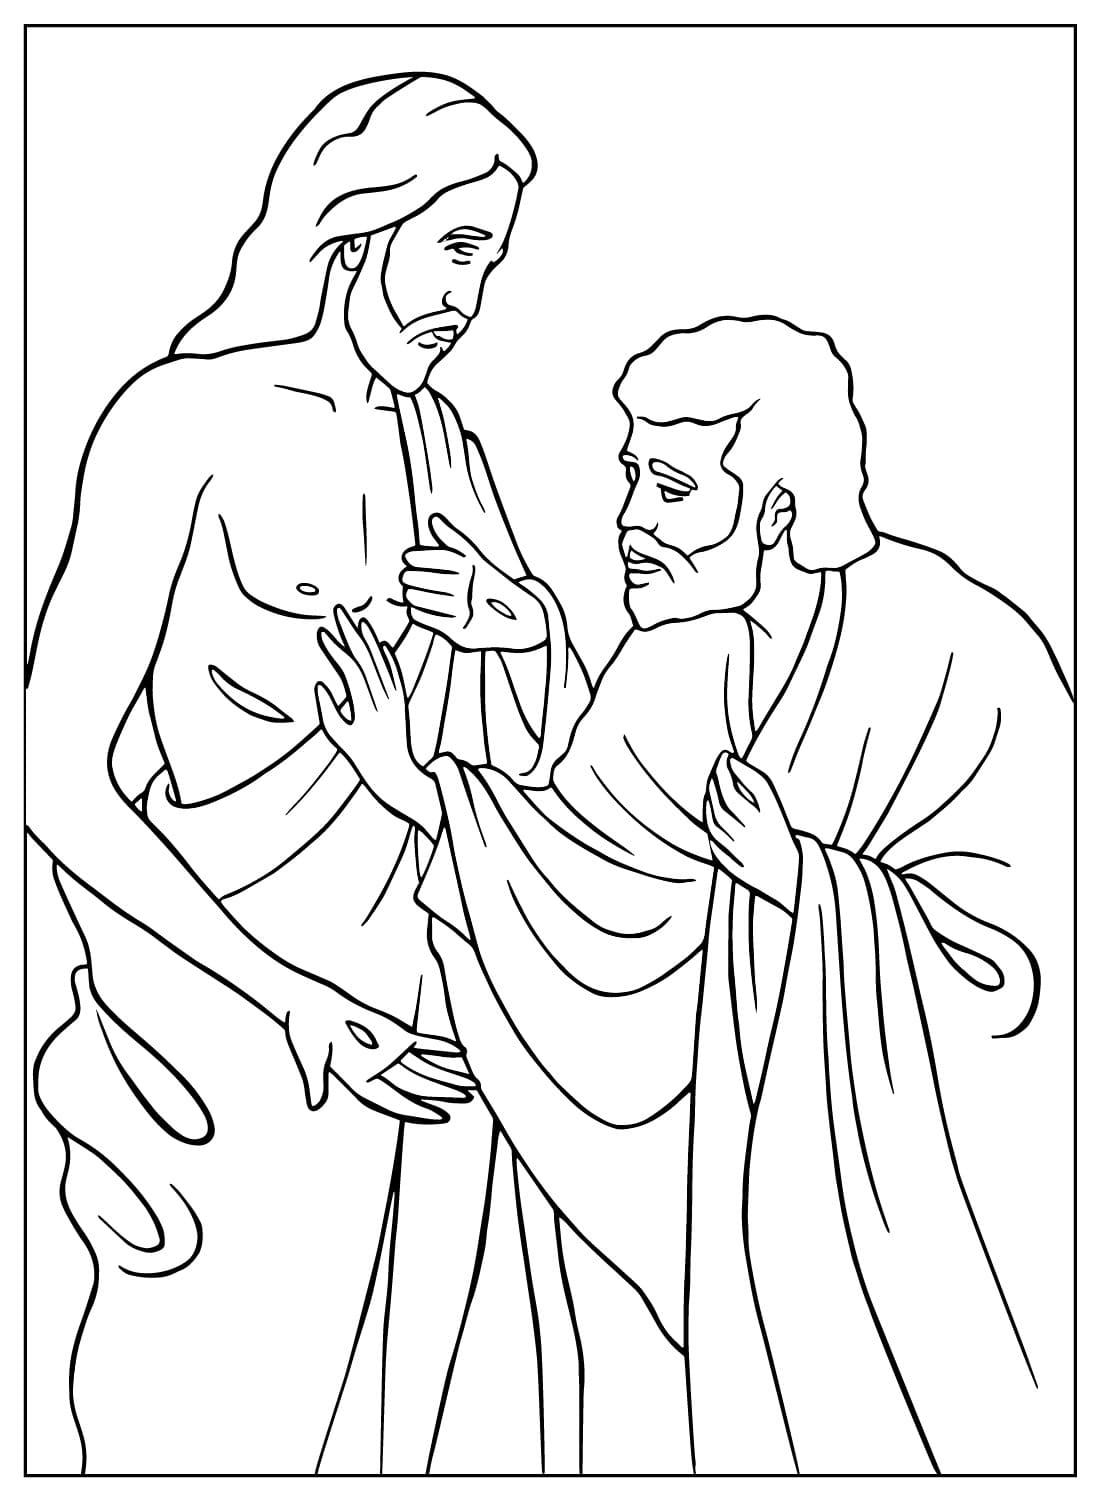 Jesus Appears to the Apostles Coloring Page for Kids from Jesus